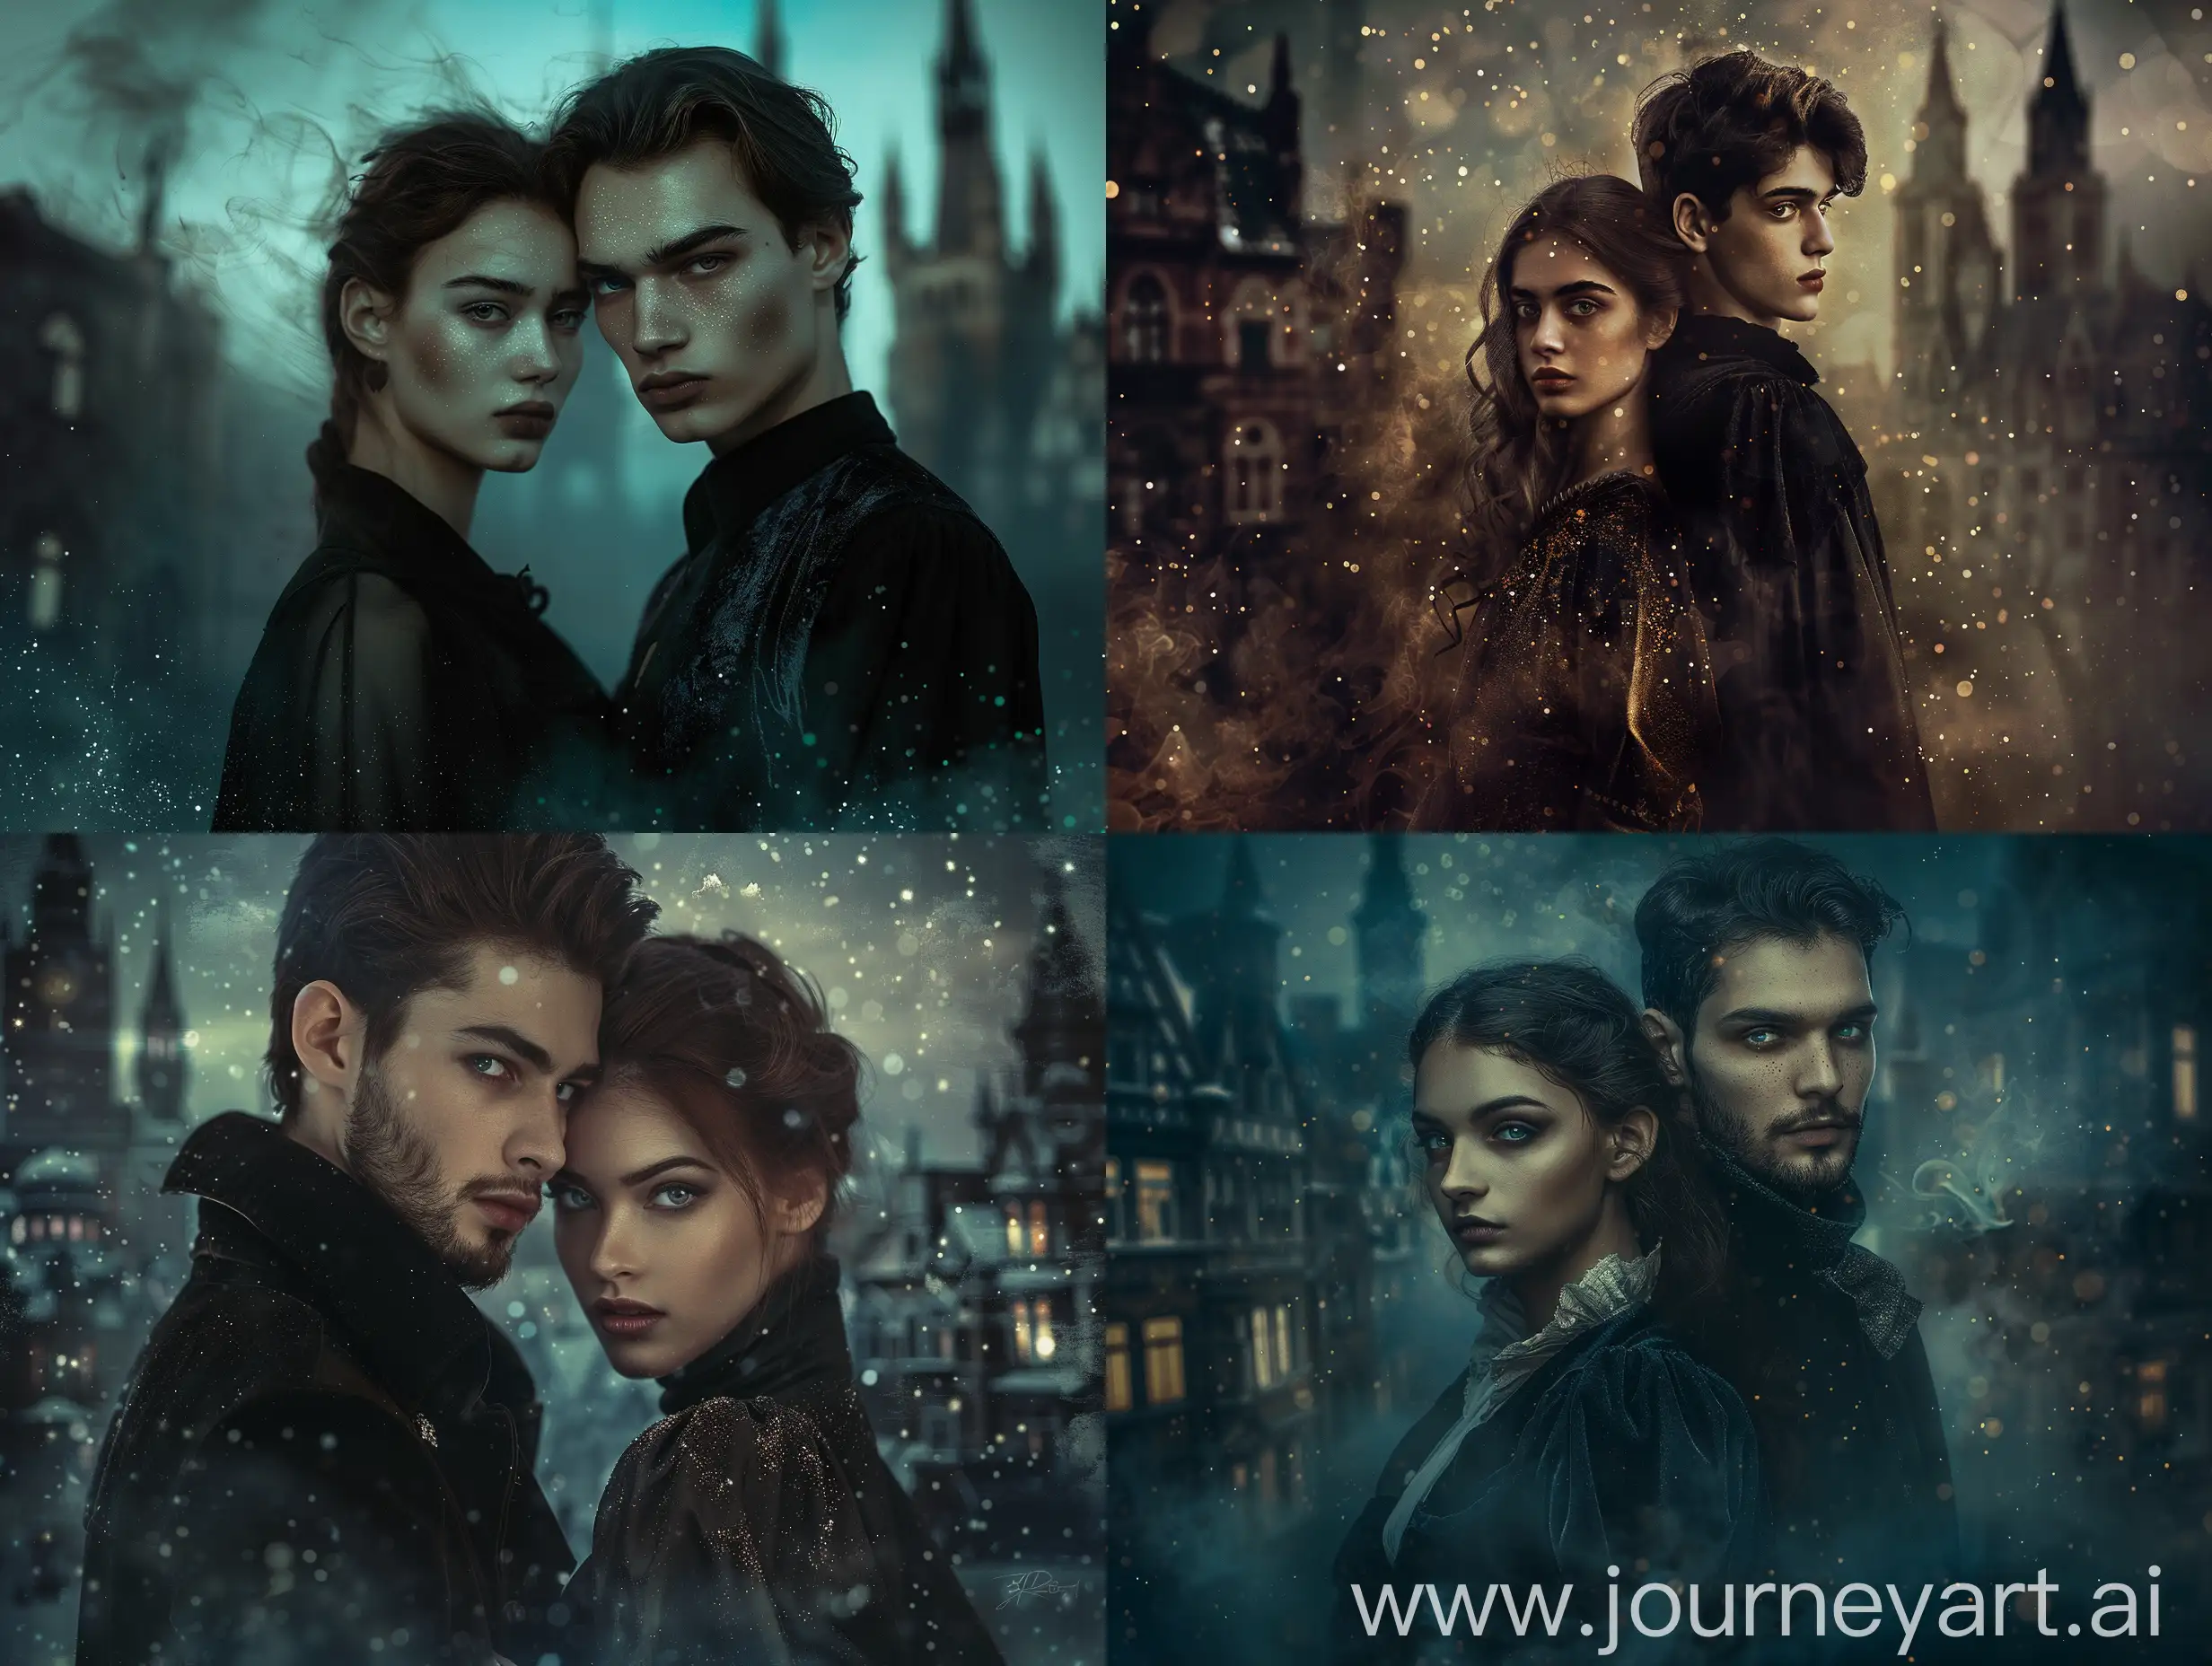 Mysterious-Gothic-Fantasy-Couple-in-Hyperrealistic-Cityscape